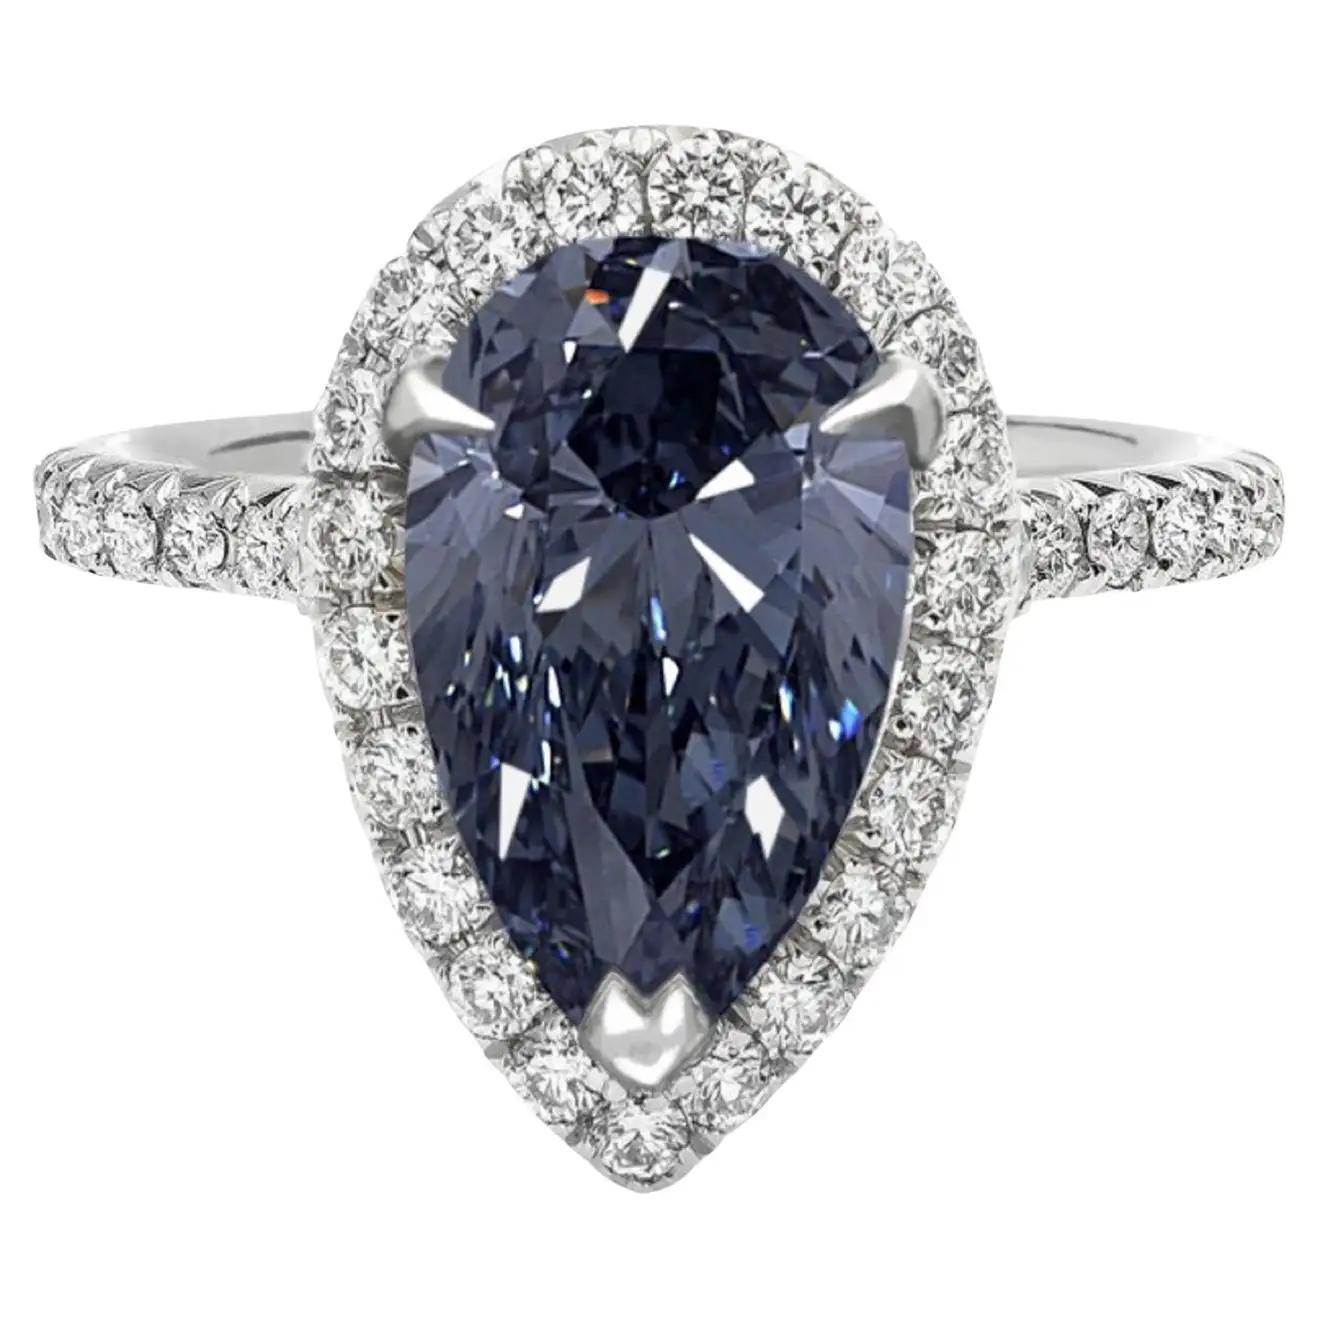 Modern Exceptional GIA Certified 1 Carat Fancy Intense Blue Diamond Ring For Sale